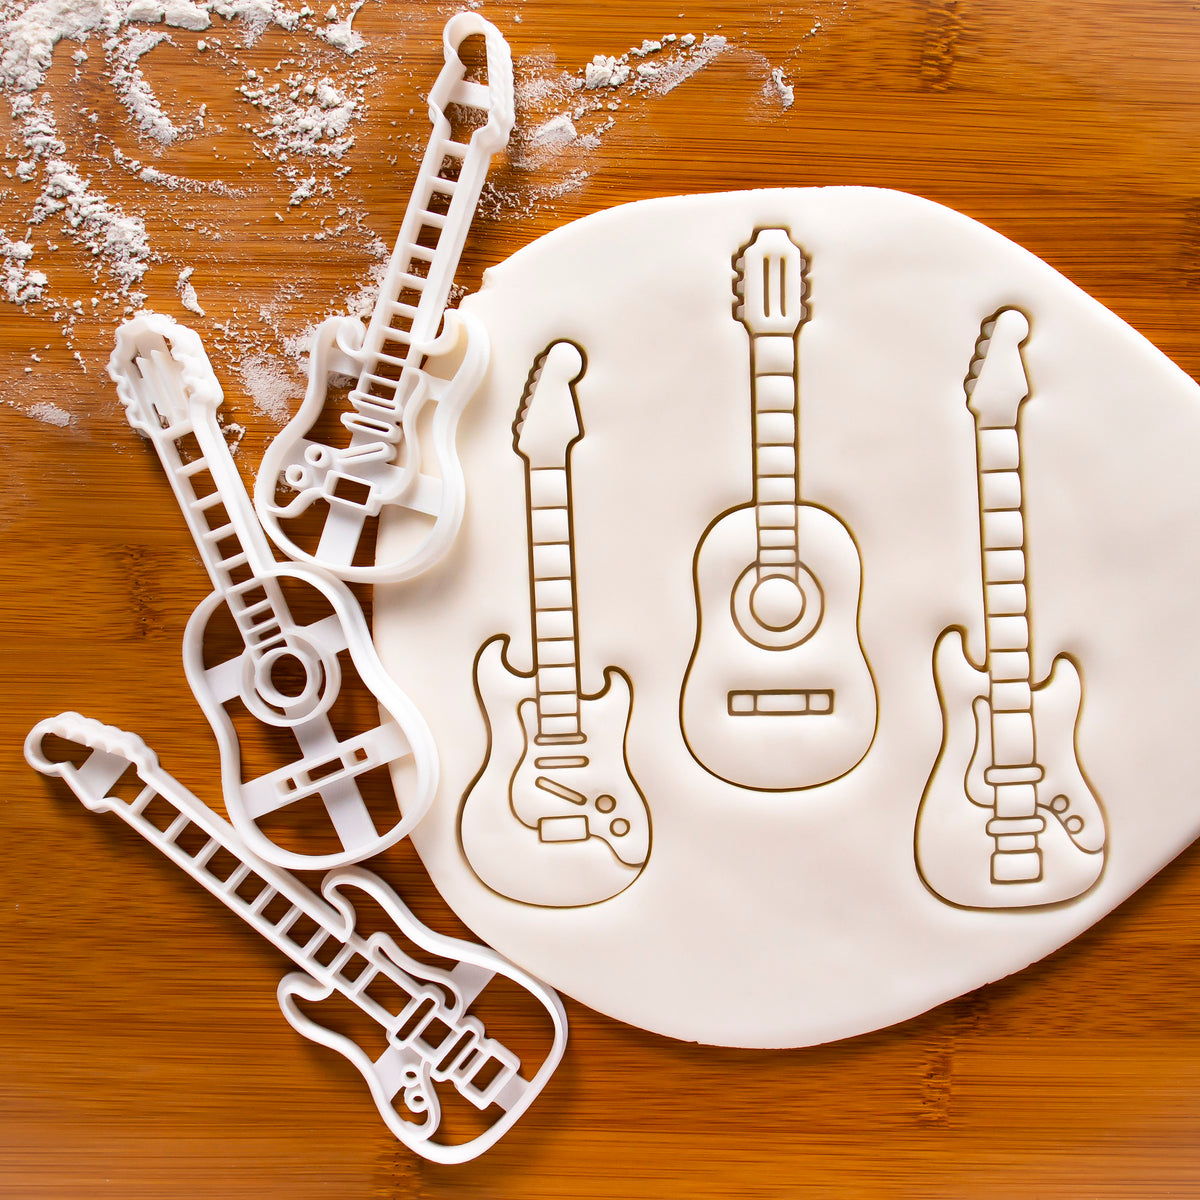 Set of 3 Guitar Cookie Cutters - Acoustic, Electric, Electric Bass